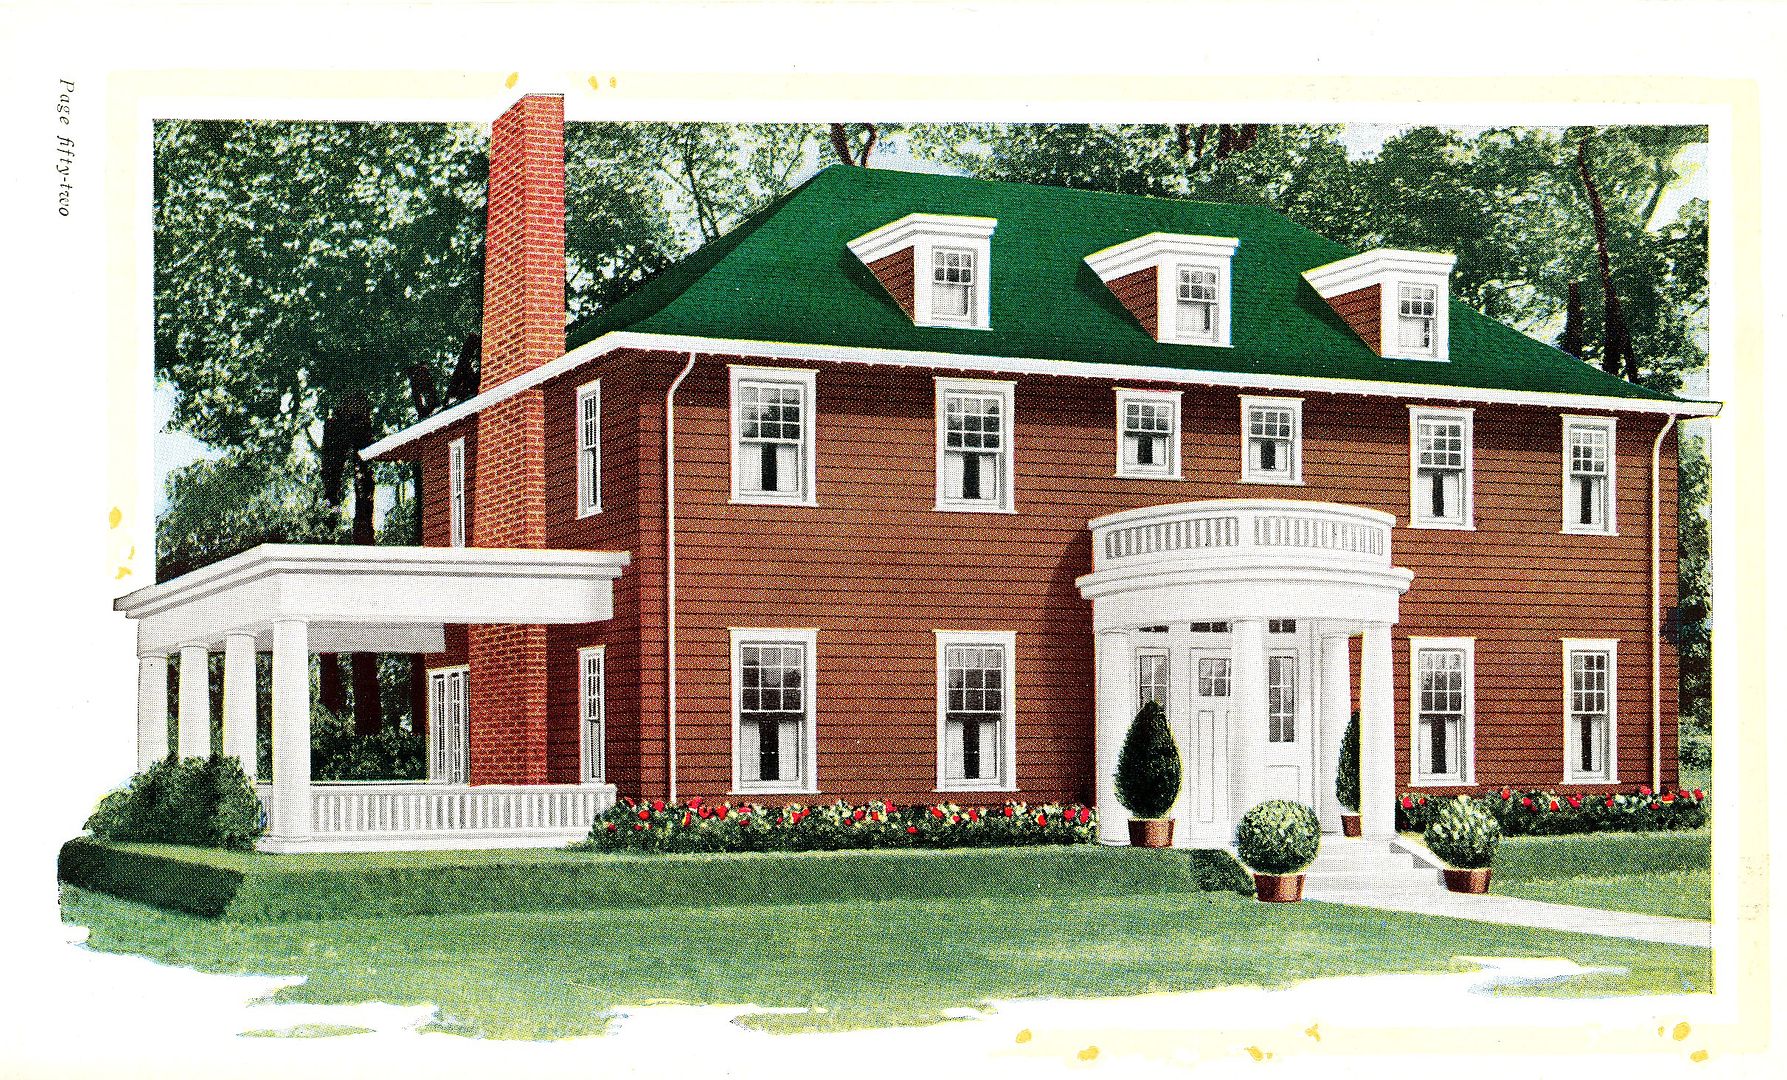 The Aladdin Colonial, as seen in the 1919 Aladdin Homes catalog.